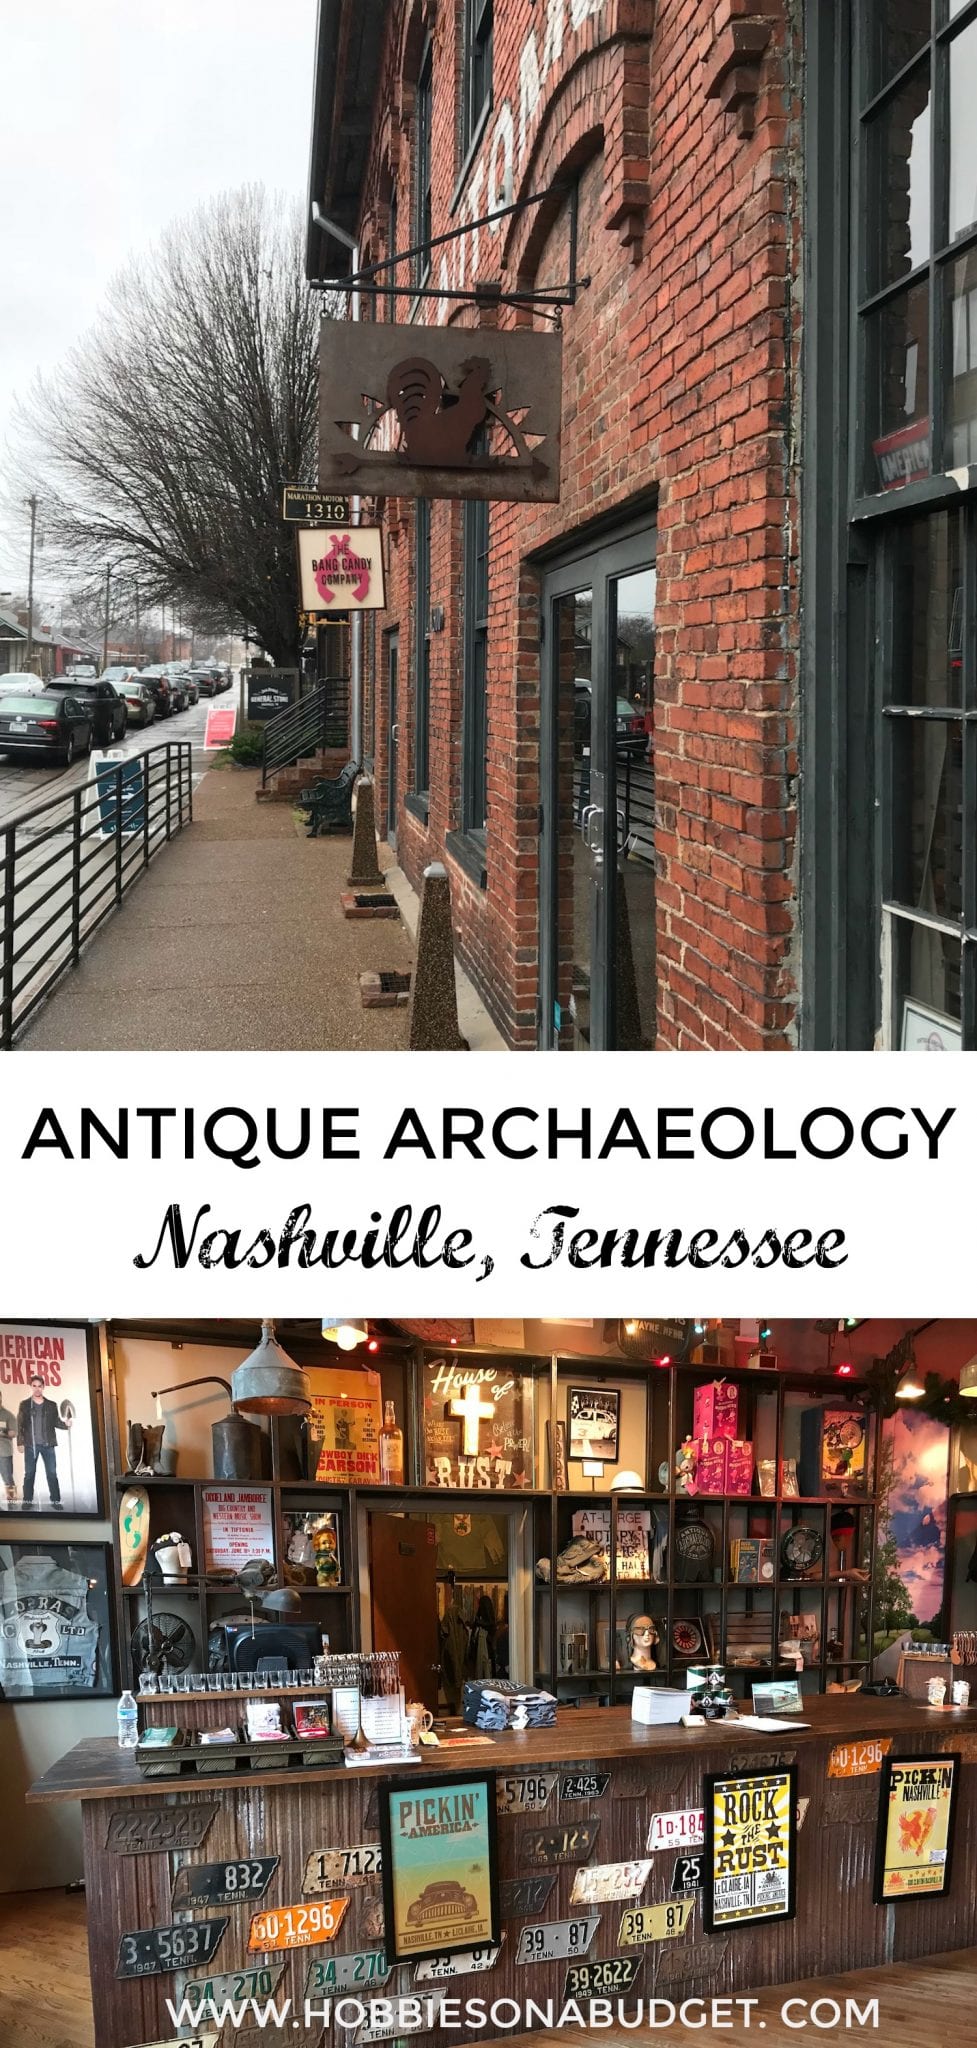 Antique Archaeology Nashville, Tennessee